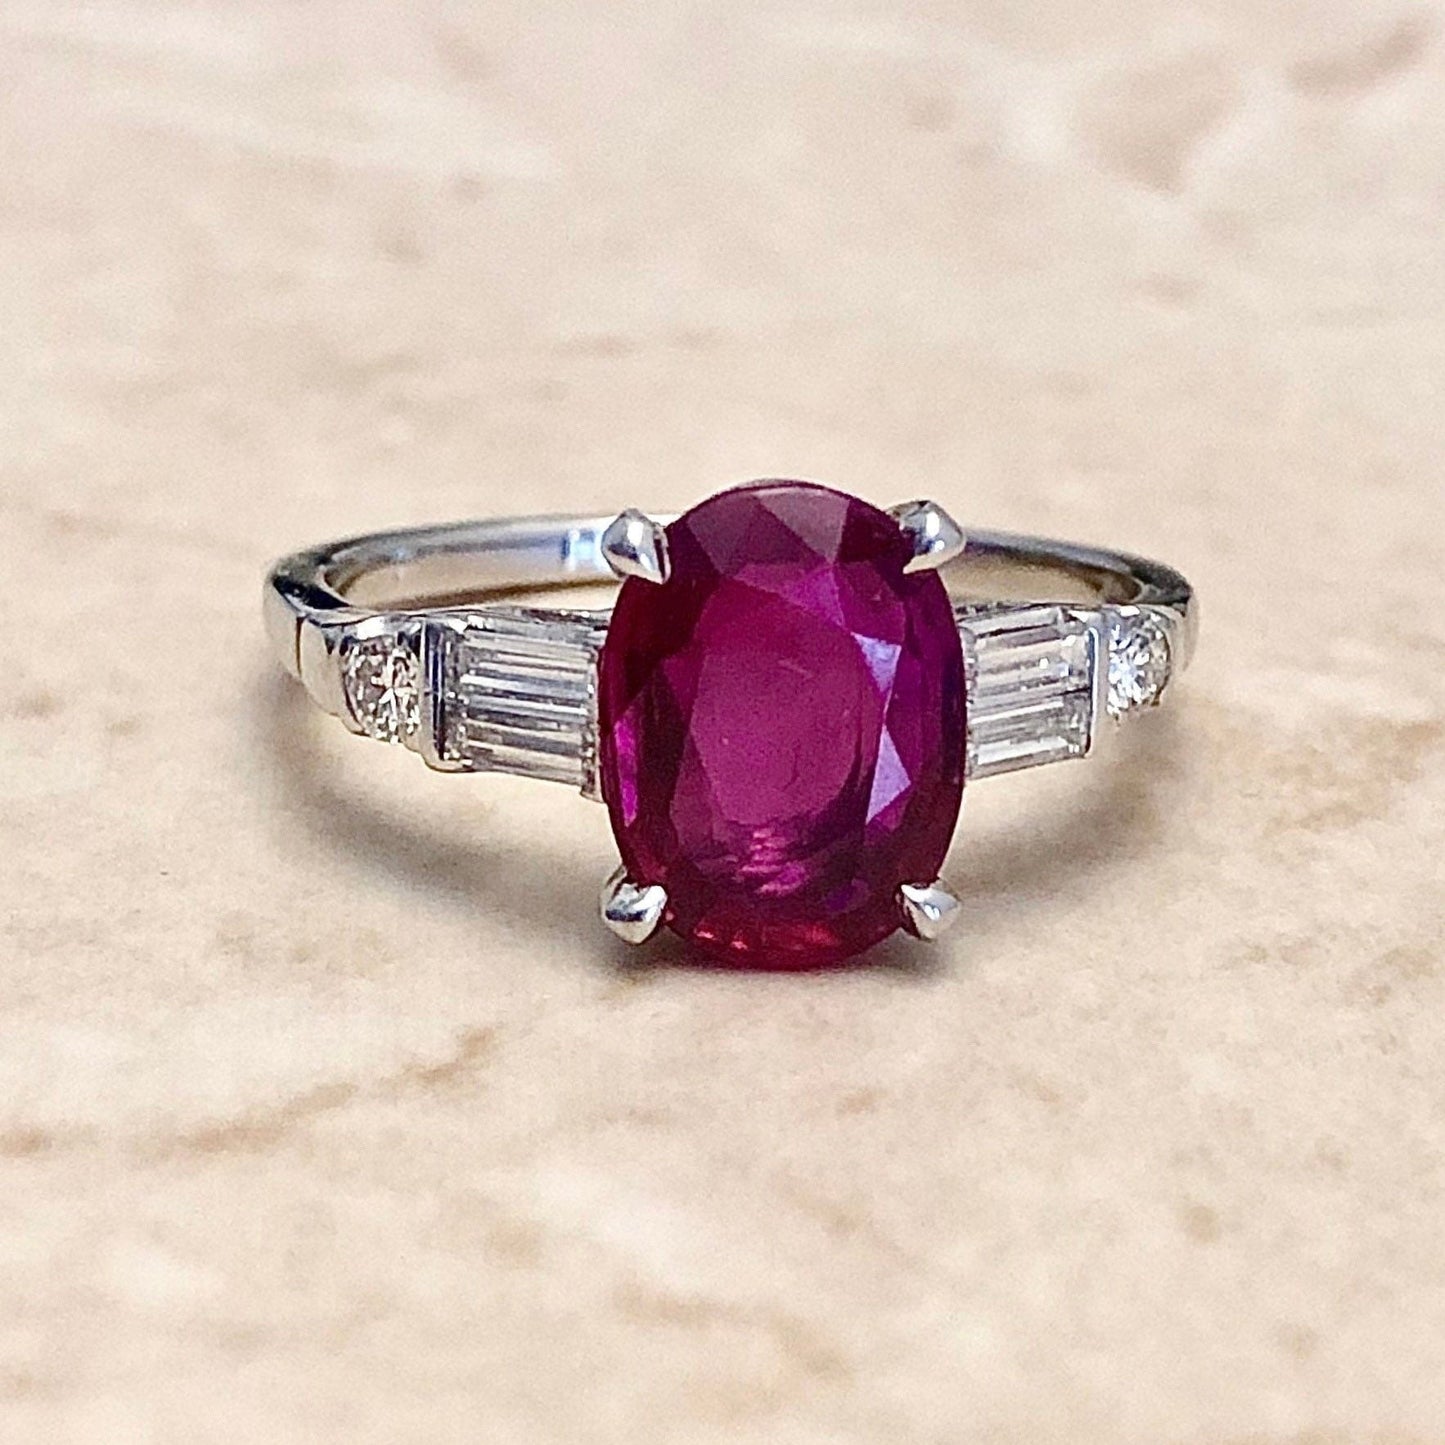 Vintage Handcrafted Platinum Ruby & Diamond Ring By Carvin French - Handmade Platinum Ring - July Birthstone Ring - Ruby Engagement Ring